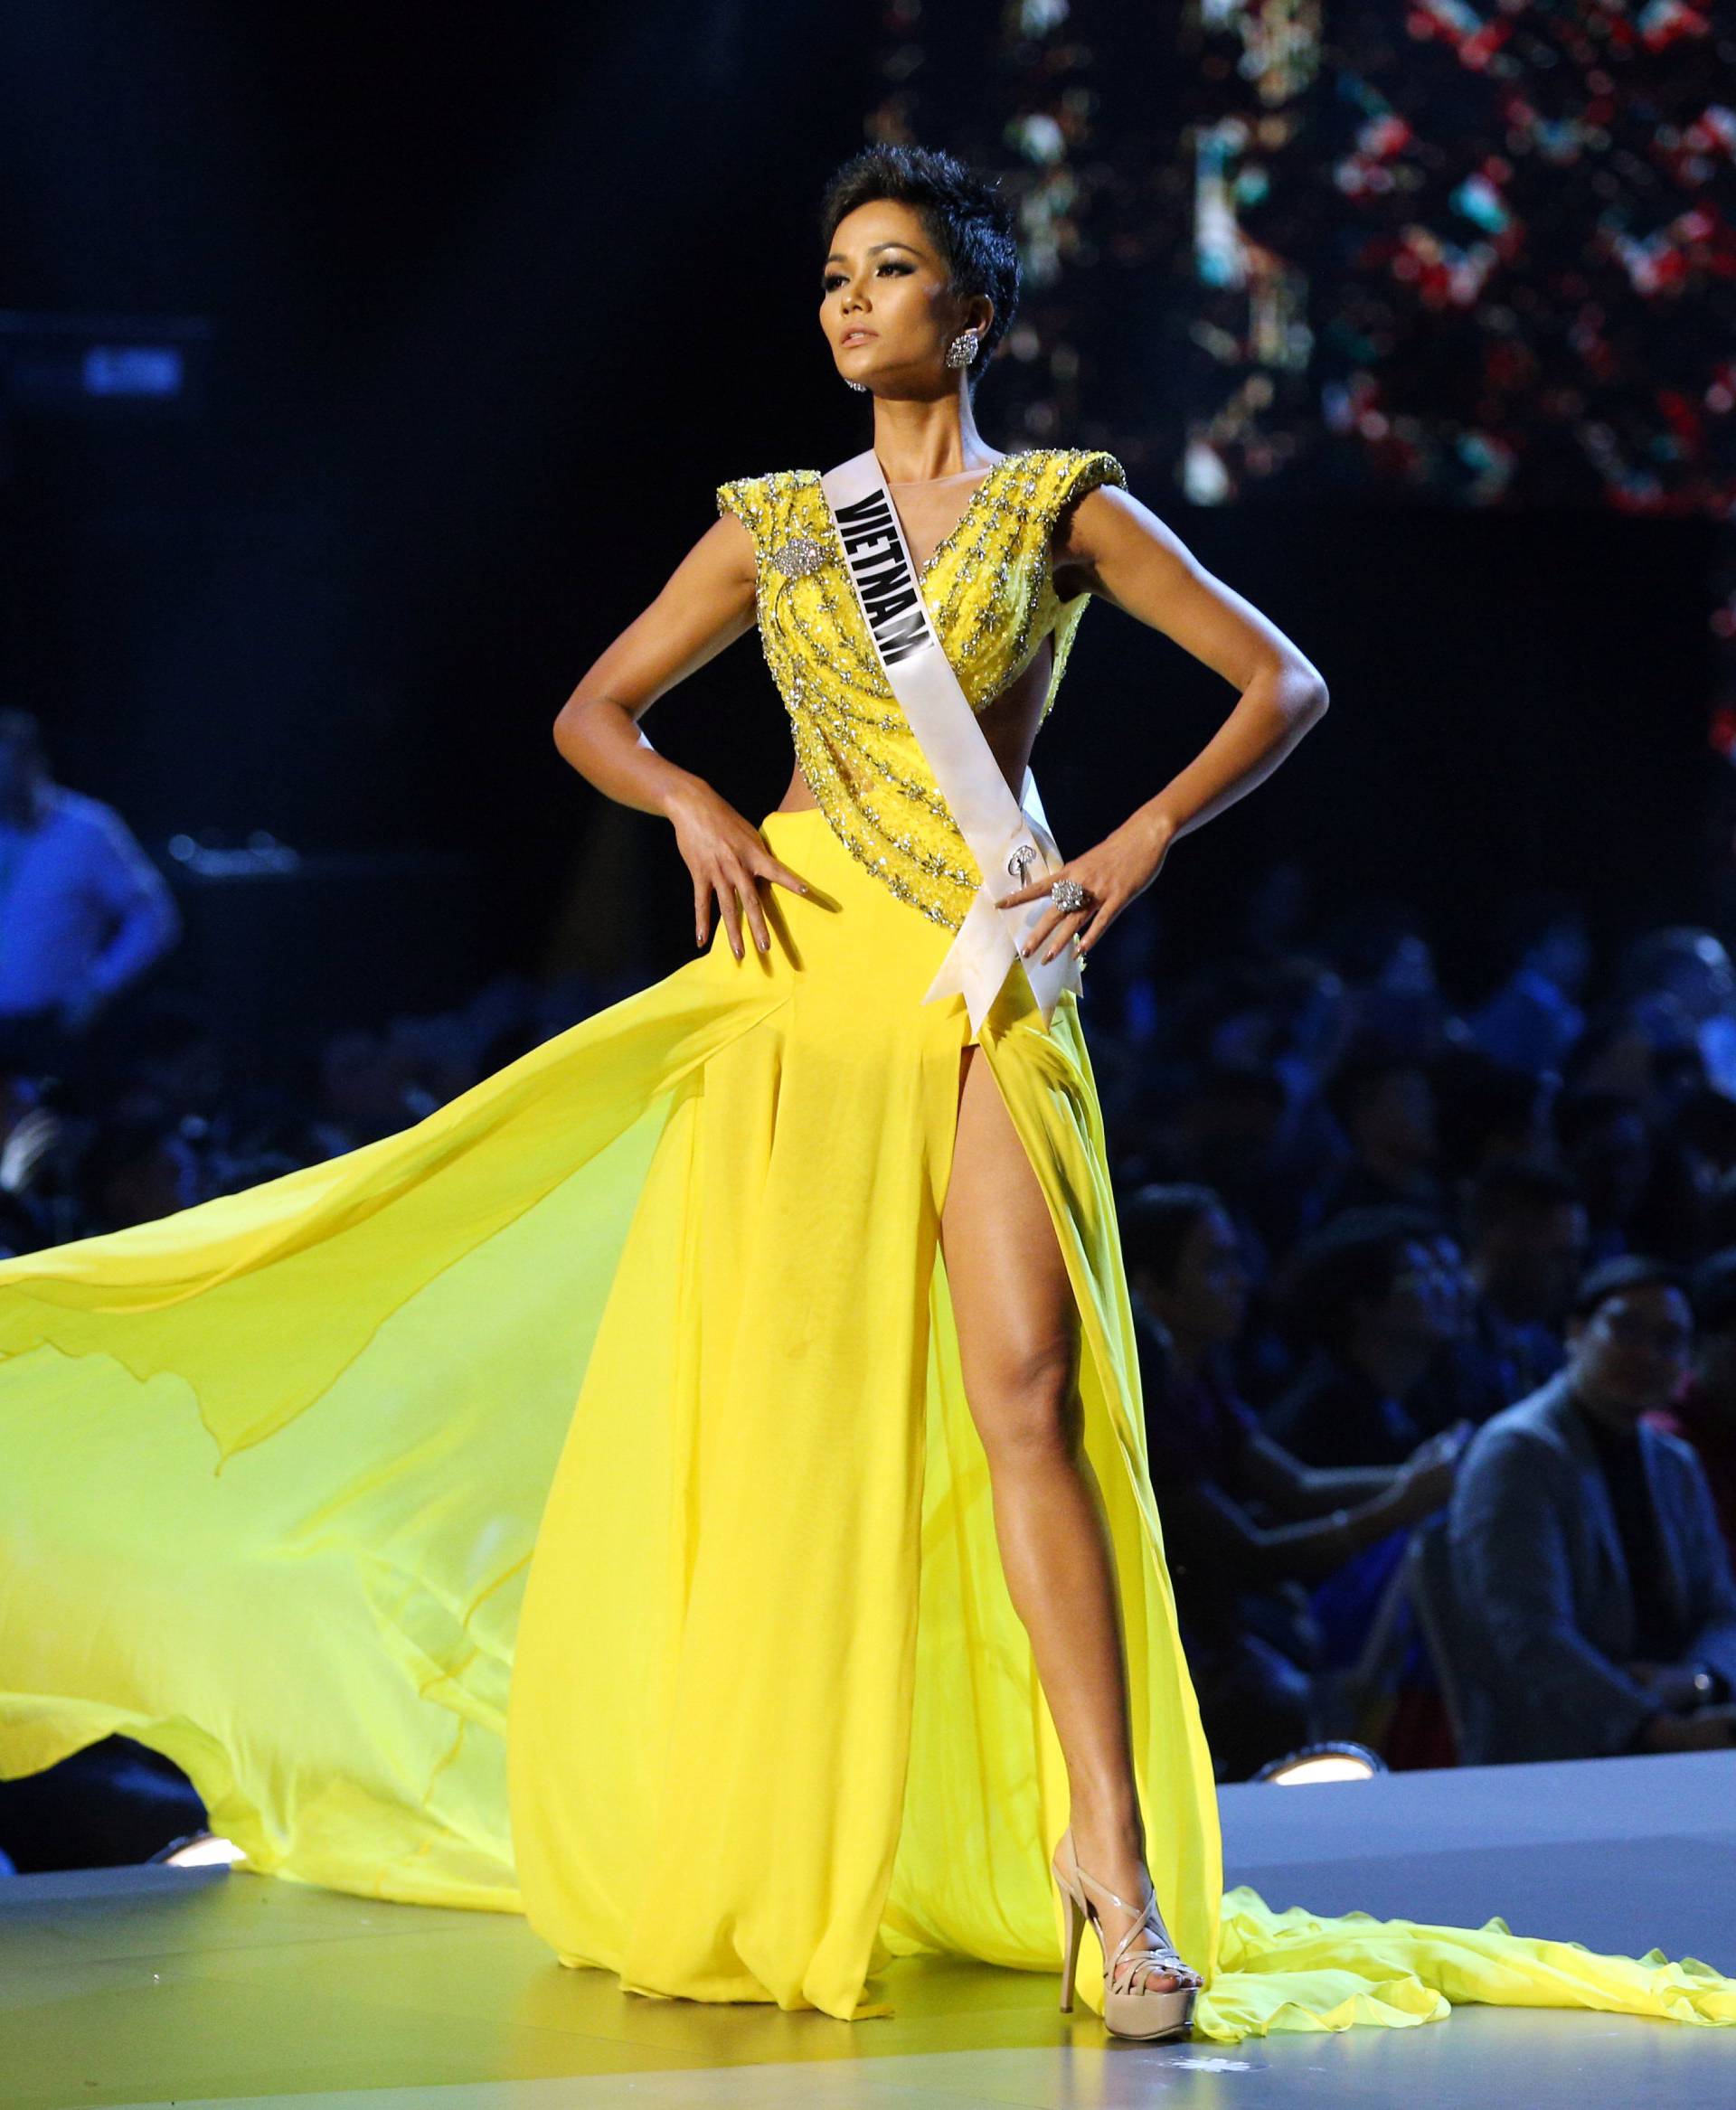 Miss Vietnam H'Hen Nie in her evening gown during the Miss Universe 2018 preliminary round in Bangkok